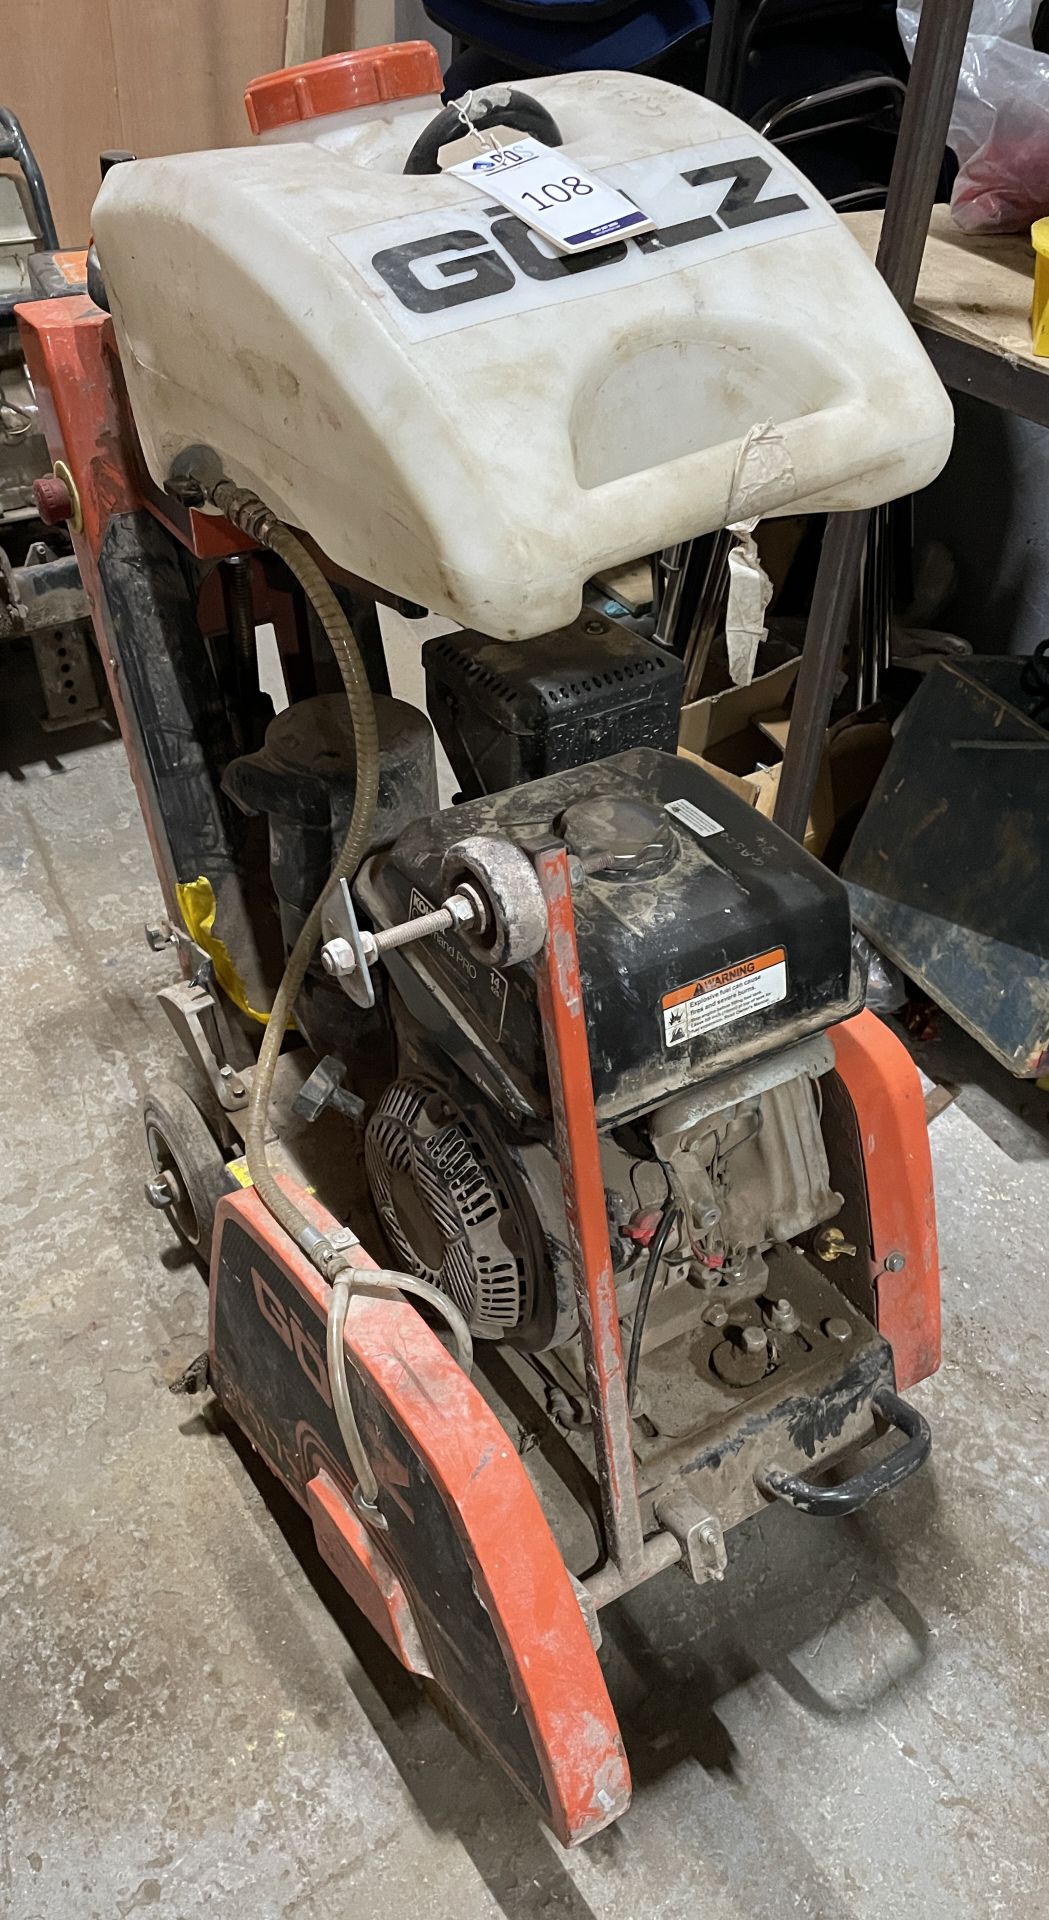 Golz FS175 Floor Saw, Petrol (Location: March, Cambridge. Please Refer to General Notes)